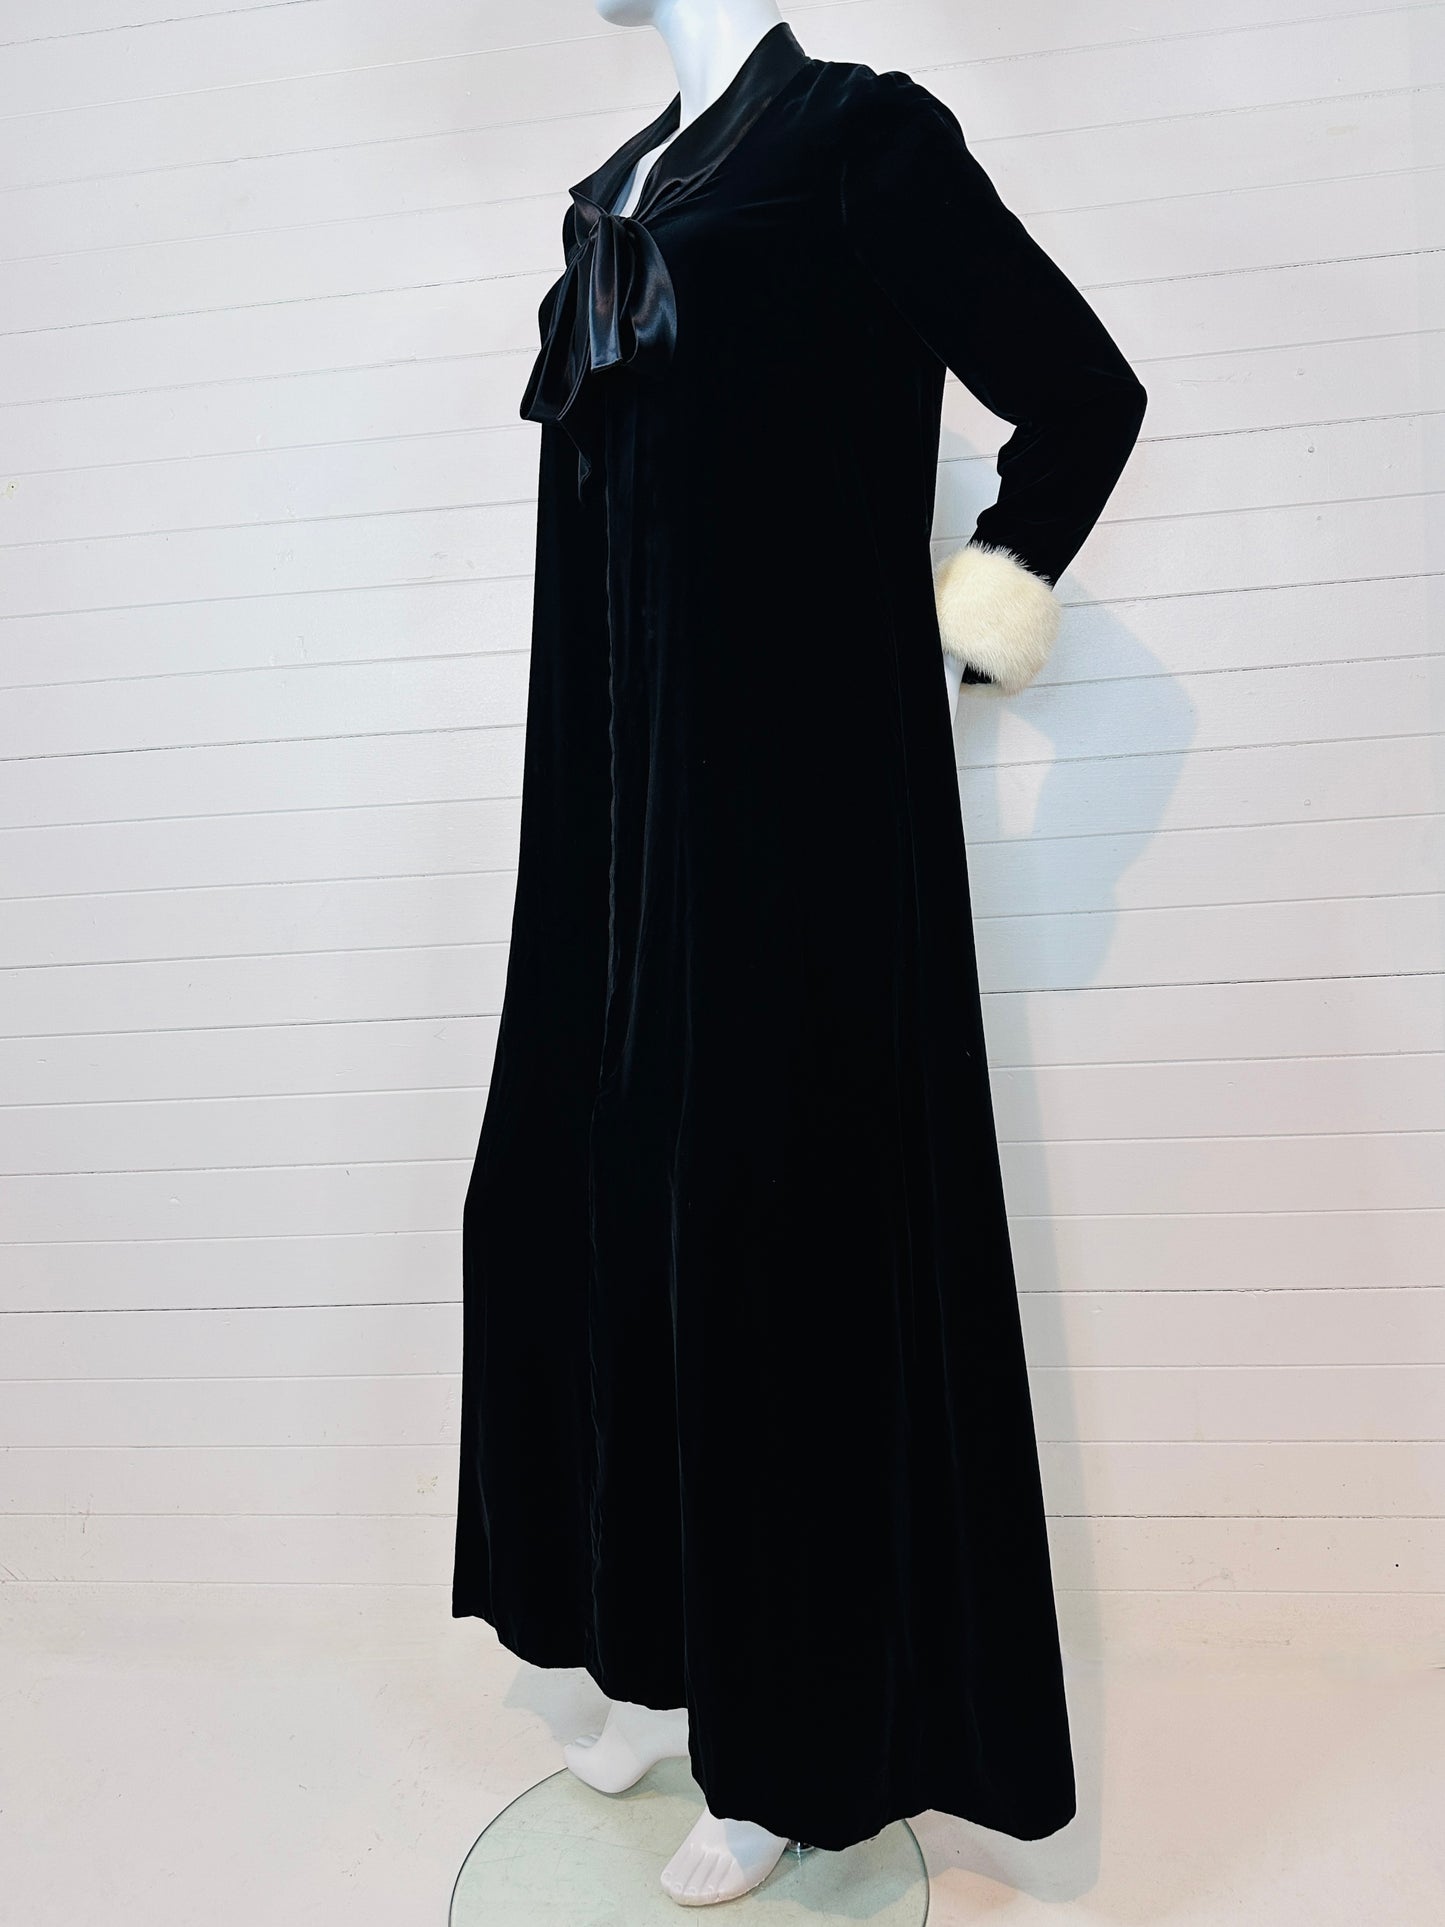 1970's Black Velvet Old Hollywood Dressing Gown with Mink Cuffs (M-L)